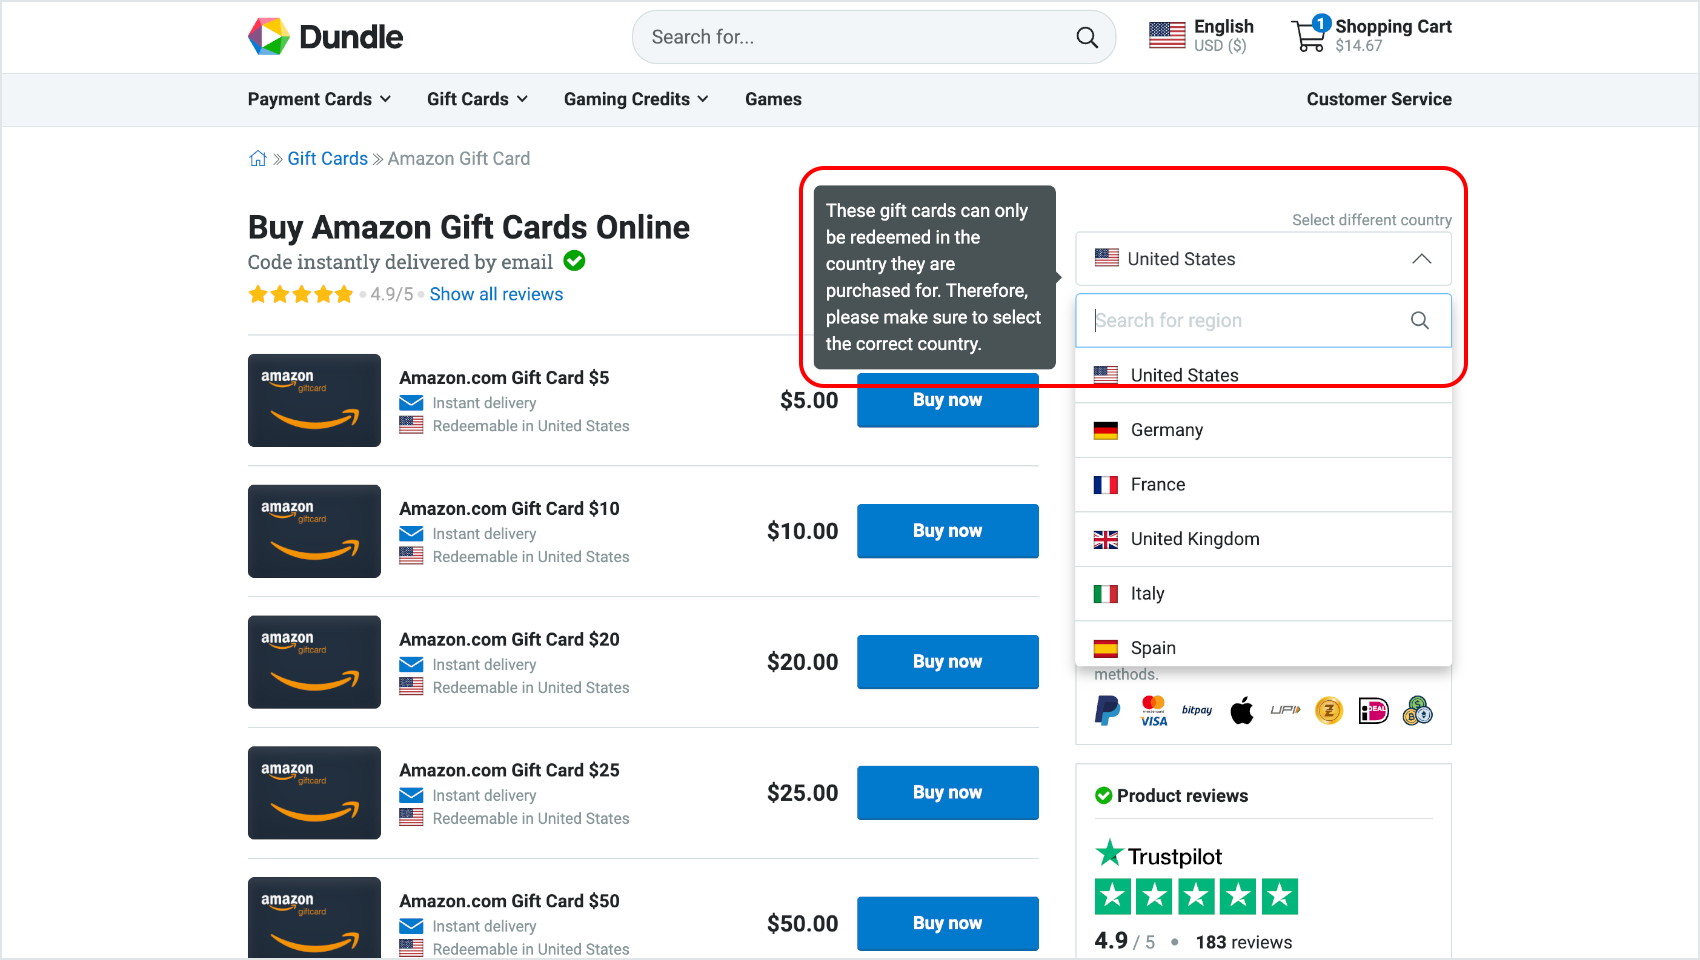 Can I purchase an Amazon Gift Card using Paypal Cr - Page 2 - PayPal Community